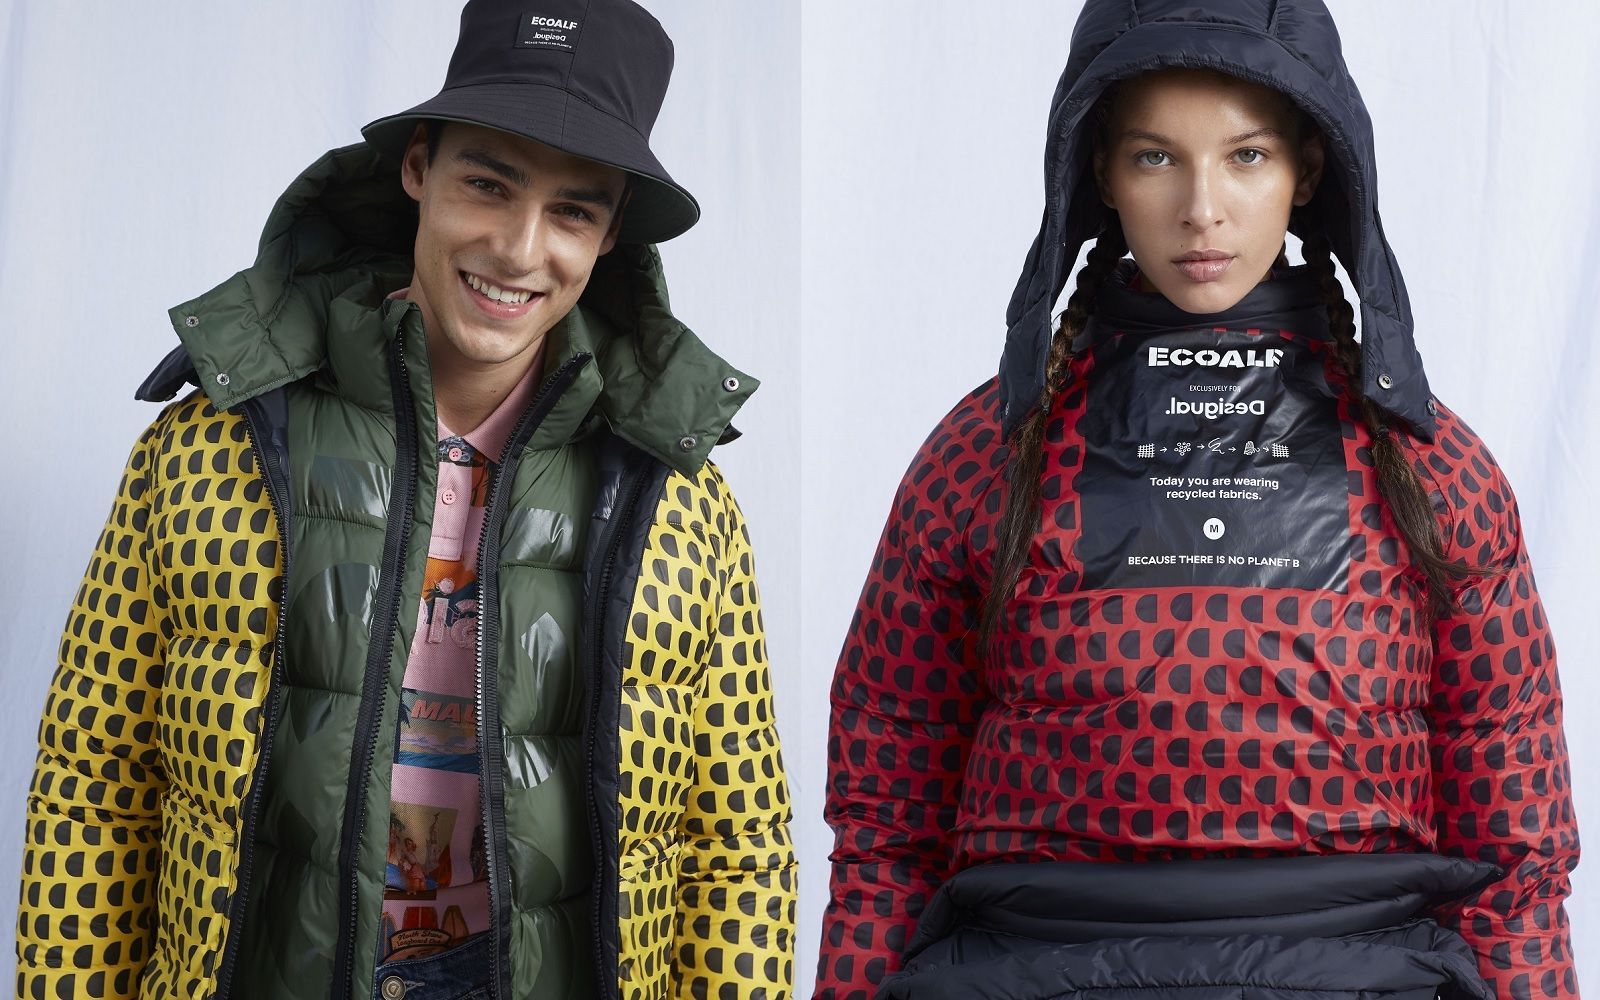 Ecoalf x Desigual's 100% sustainable collection